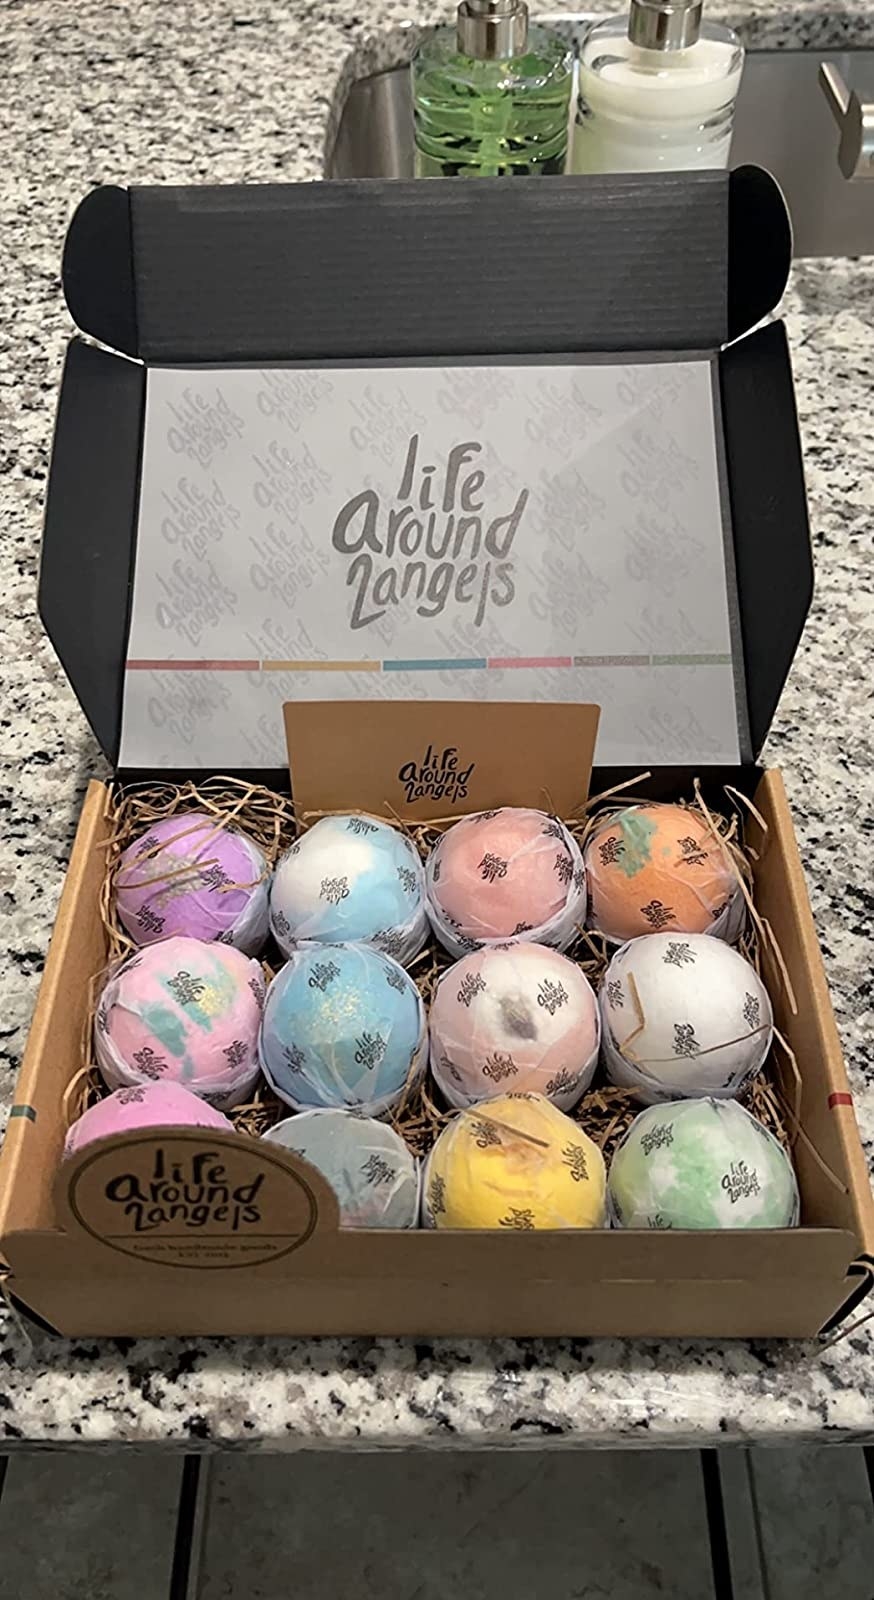 Reviewer image of wrapped bath bombs in a box